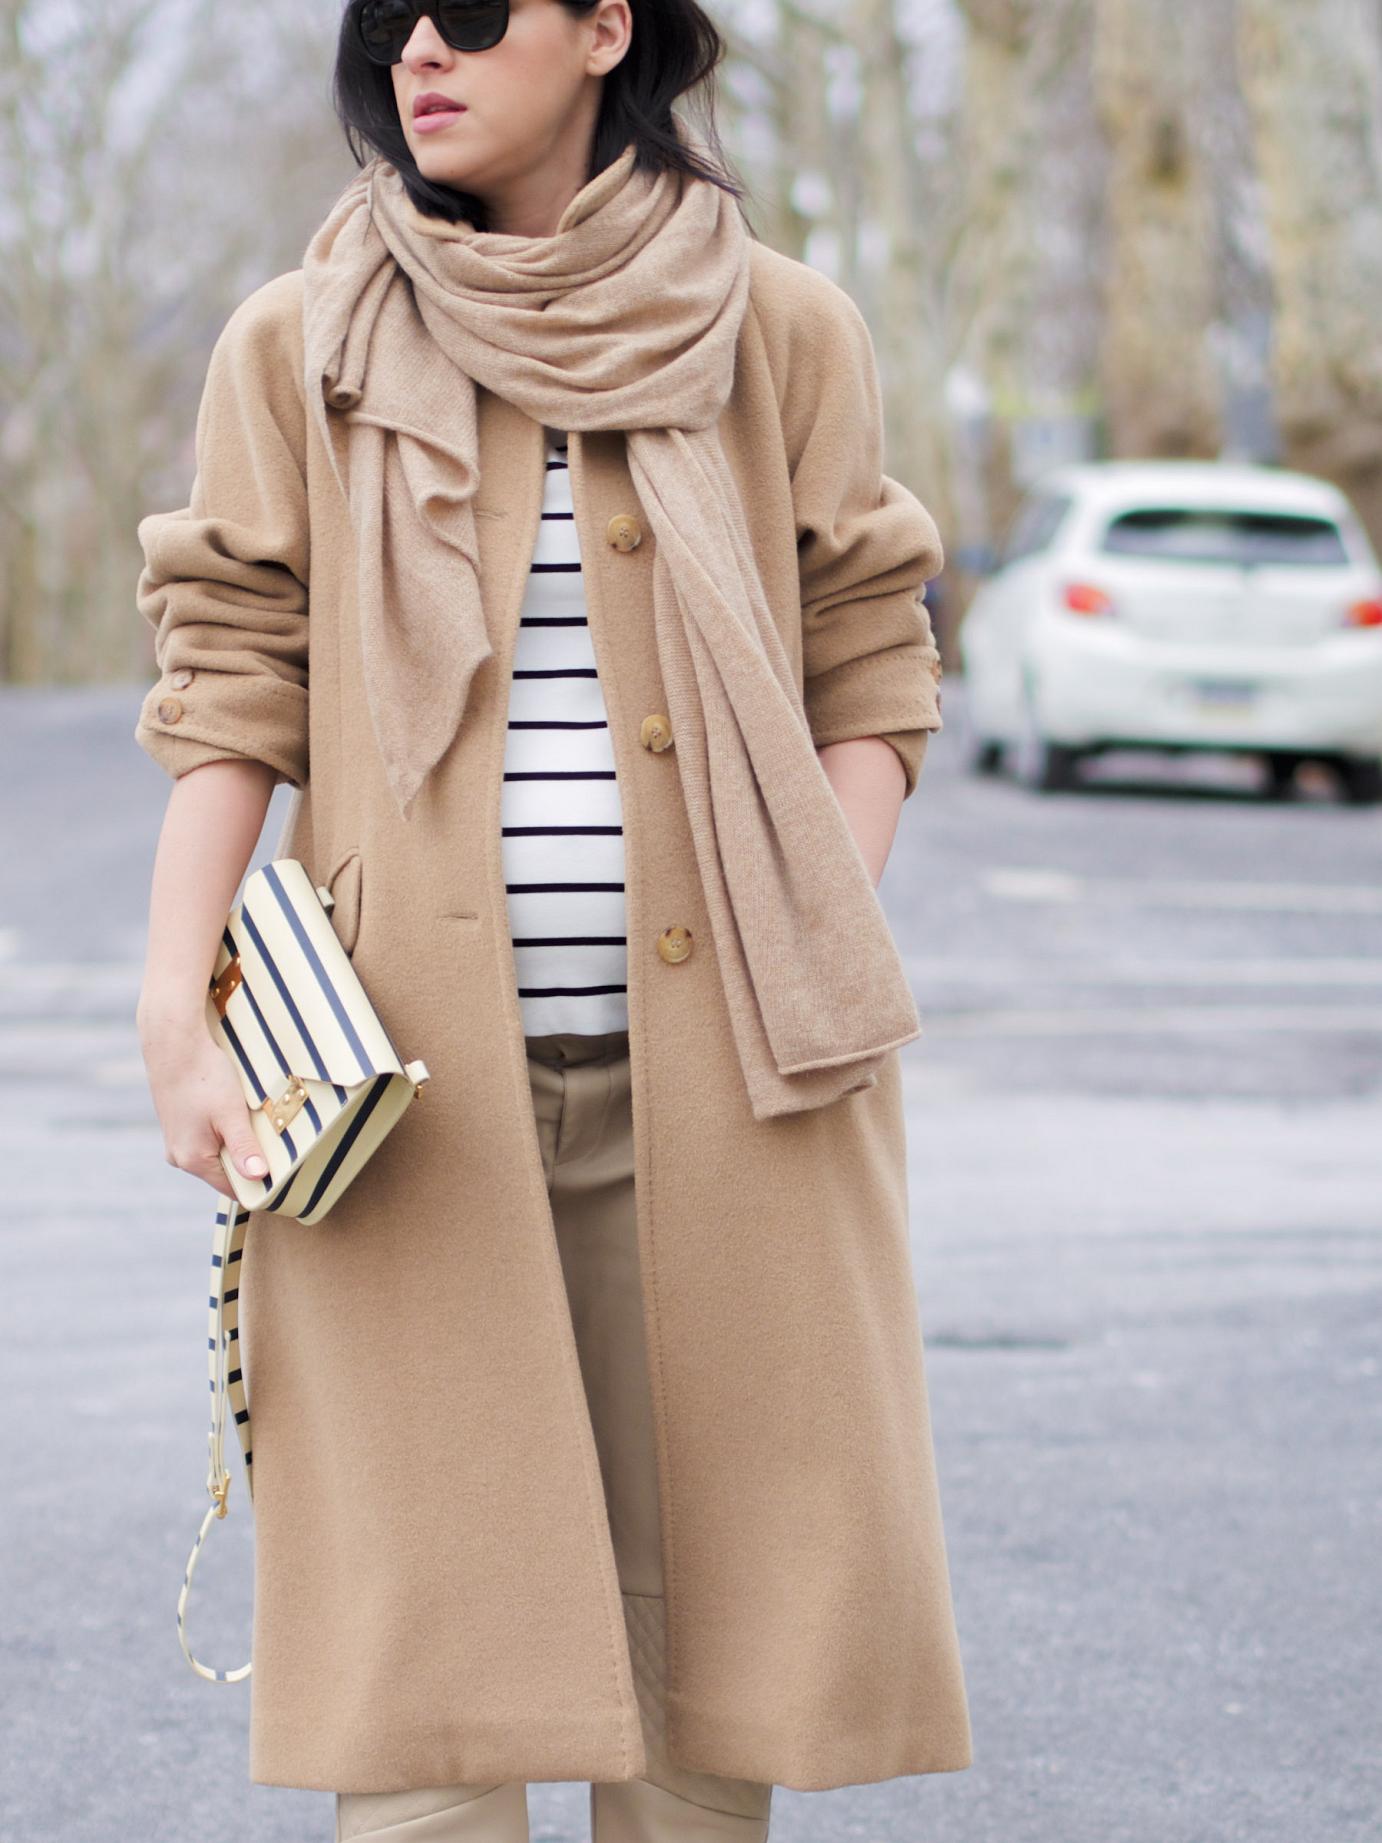 bittersweet colours, camel coat, camel and stripes, pink heels, sophie hulme bag, street style, winter trends, striped bag, neutral trend, maternity style, 32 weeks